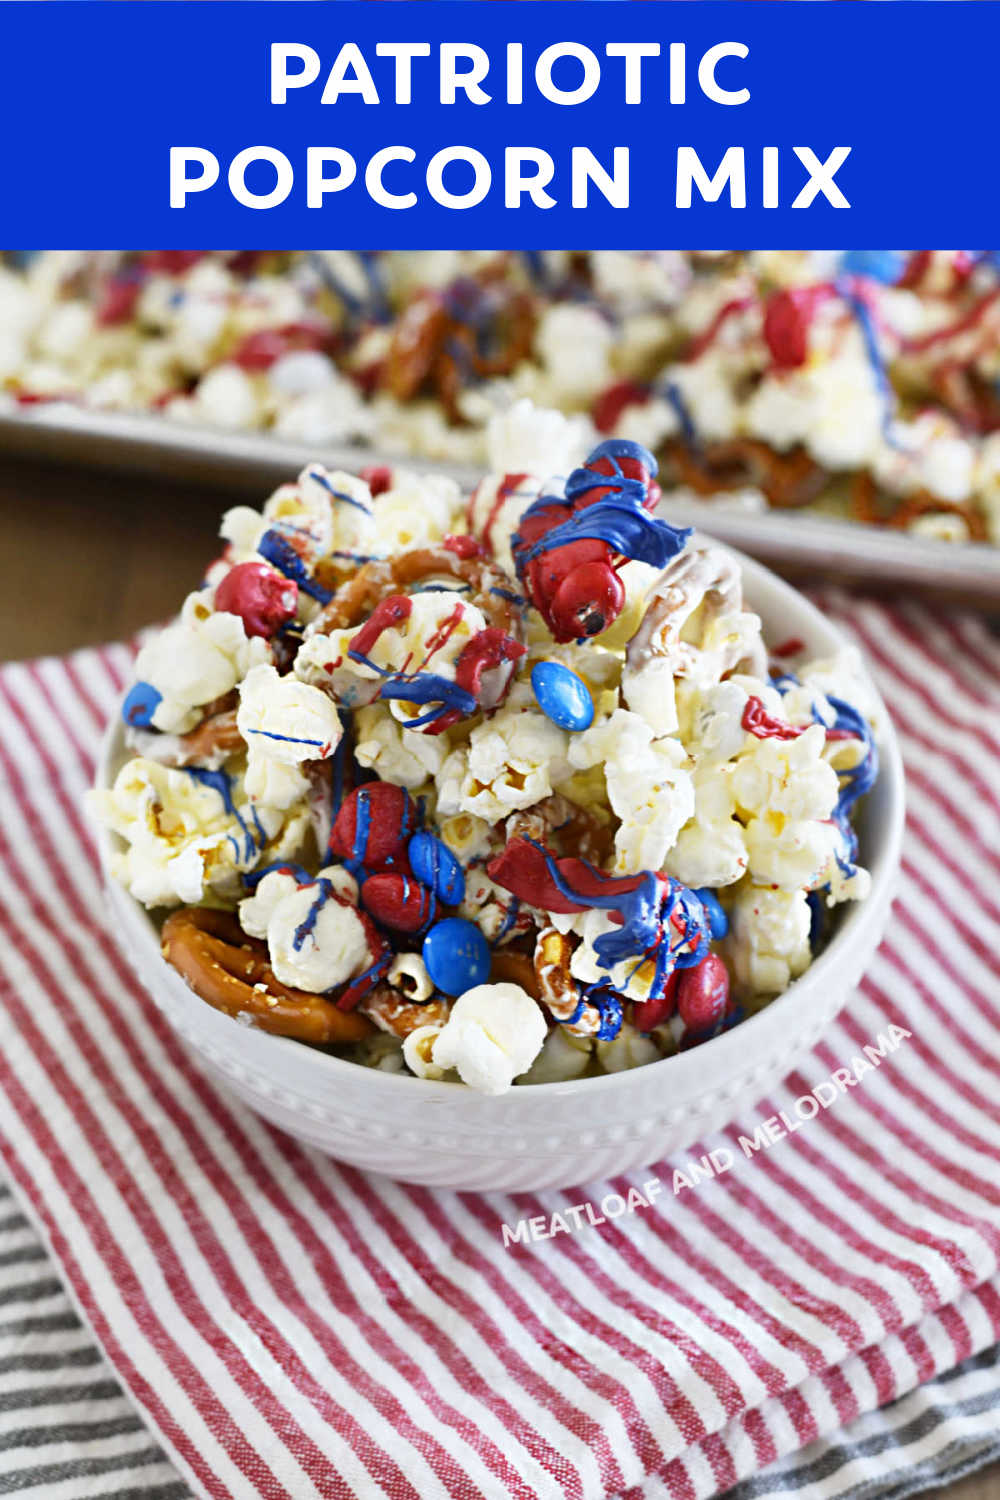 Patriotic Popcorn is a salty and sweet snack mix with pretzels and red, white and blue candy coated in chocolate. Perfect for 4th of July via @meamel